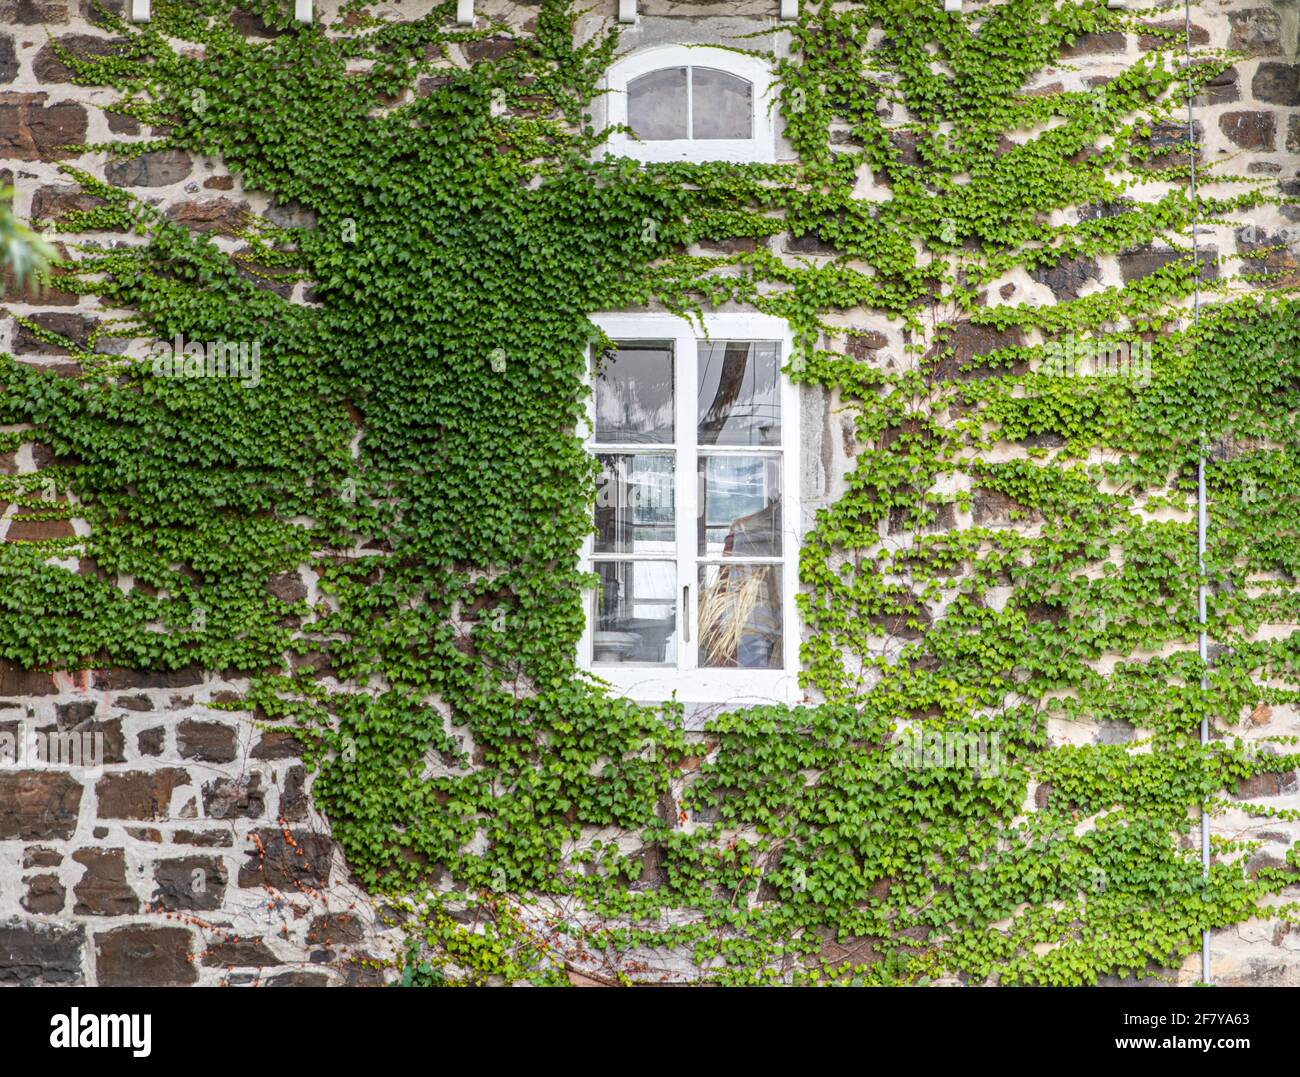 window hidden behind leafy green vines on a stone wall Stock Photo